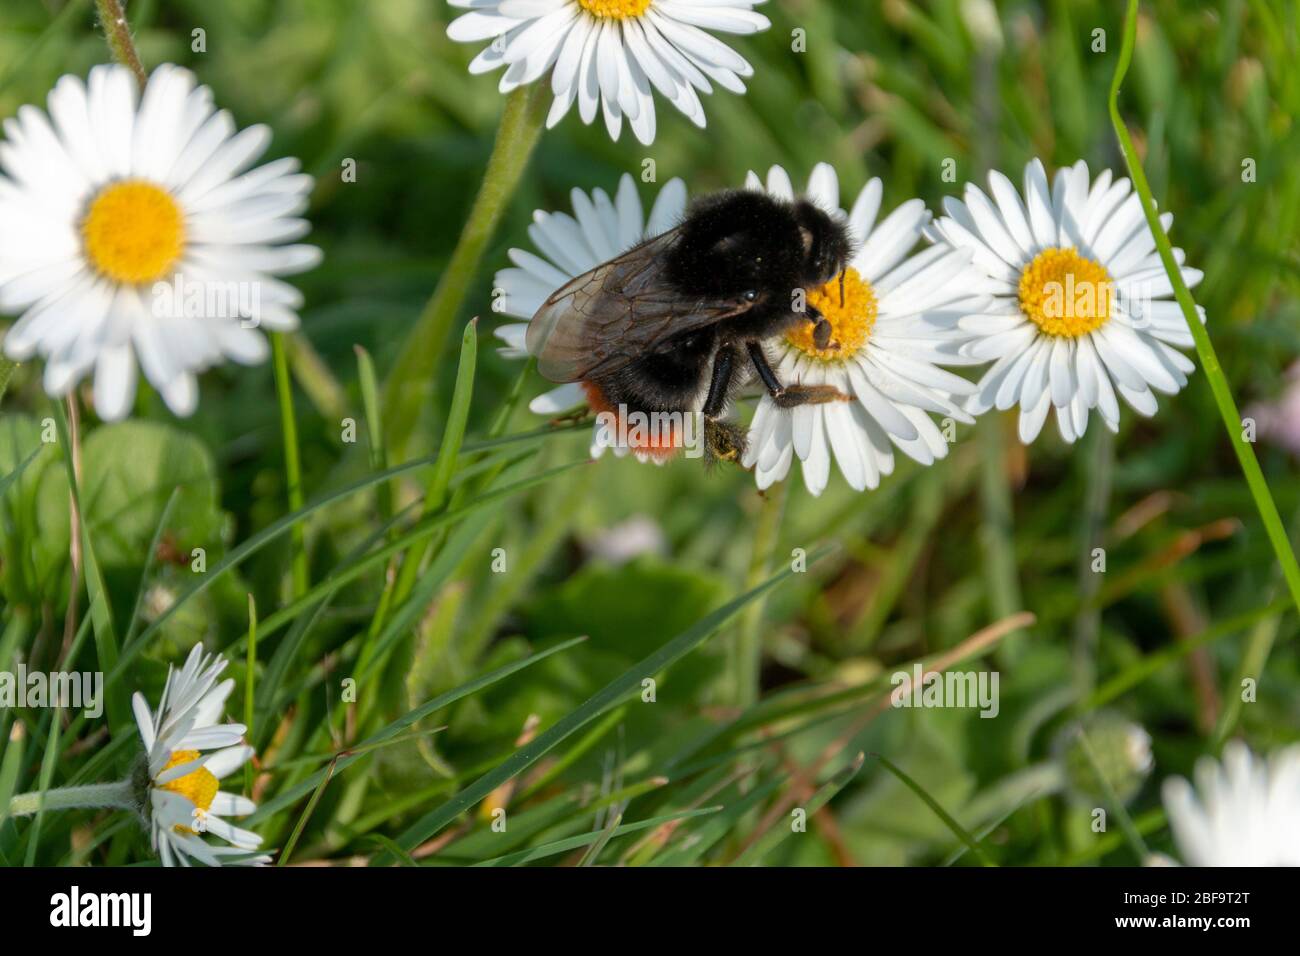 a close up view of a bumble bee collecting pollen off small daisy flowers in a open public park Stock Photo